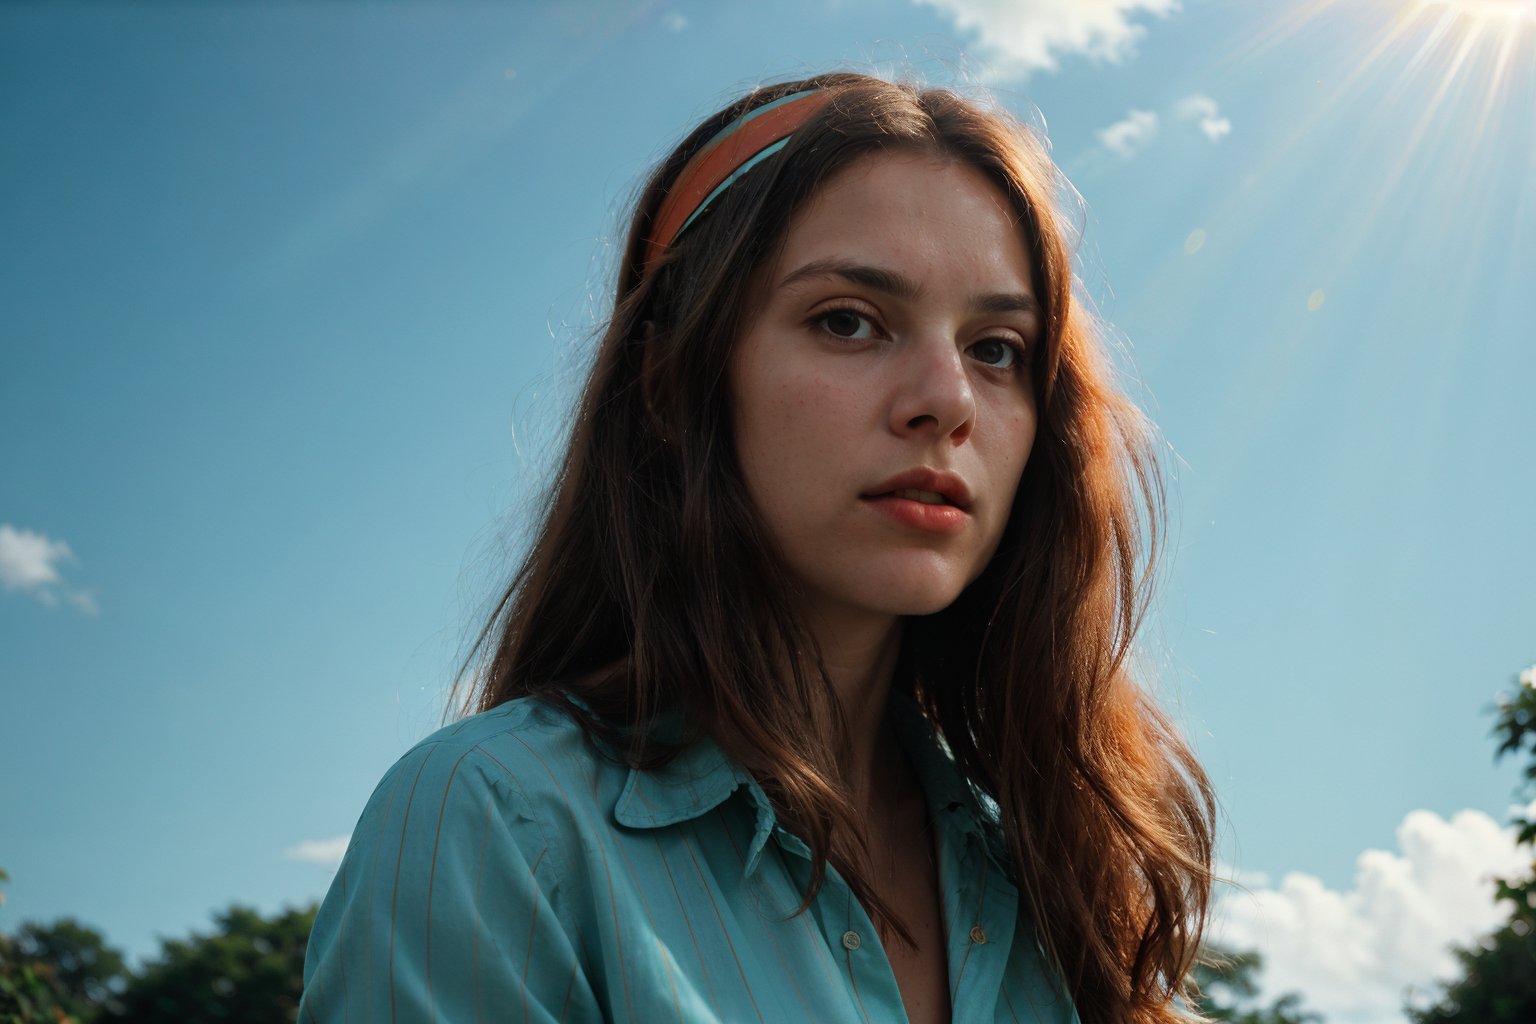 (realistic cinematic) portrait of a 70s casual dress beautiful italian women long hair, expressionless, headband, 70s hairstyle, 70s fashion, striped shirt, sun rays, light teal and amber, soft hues, Cinestill 50D